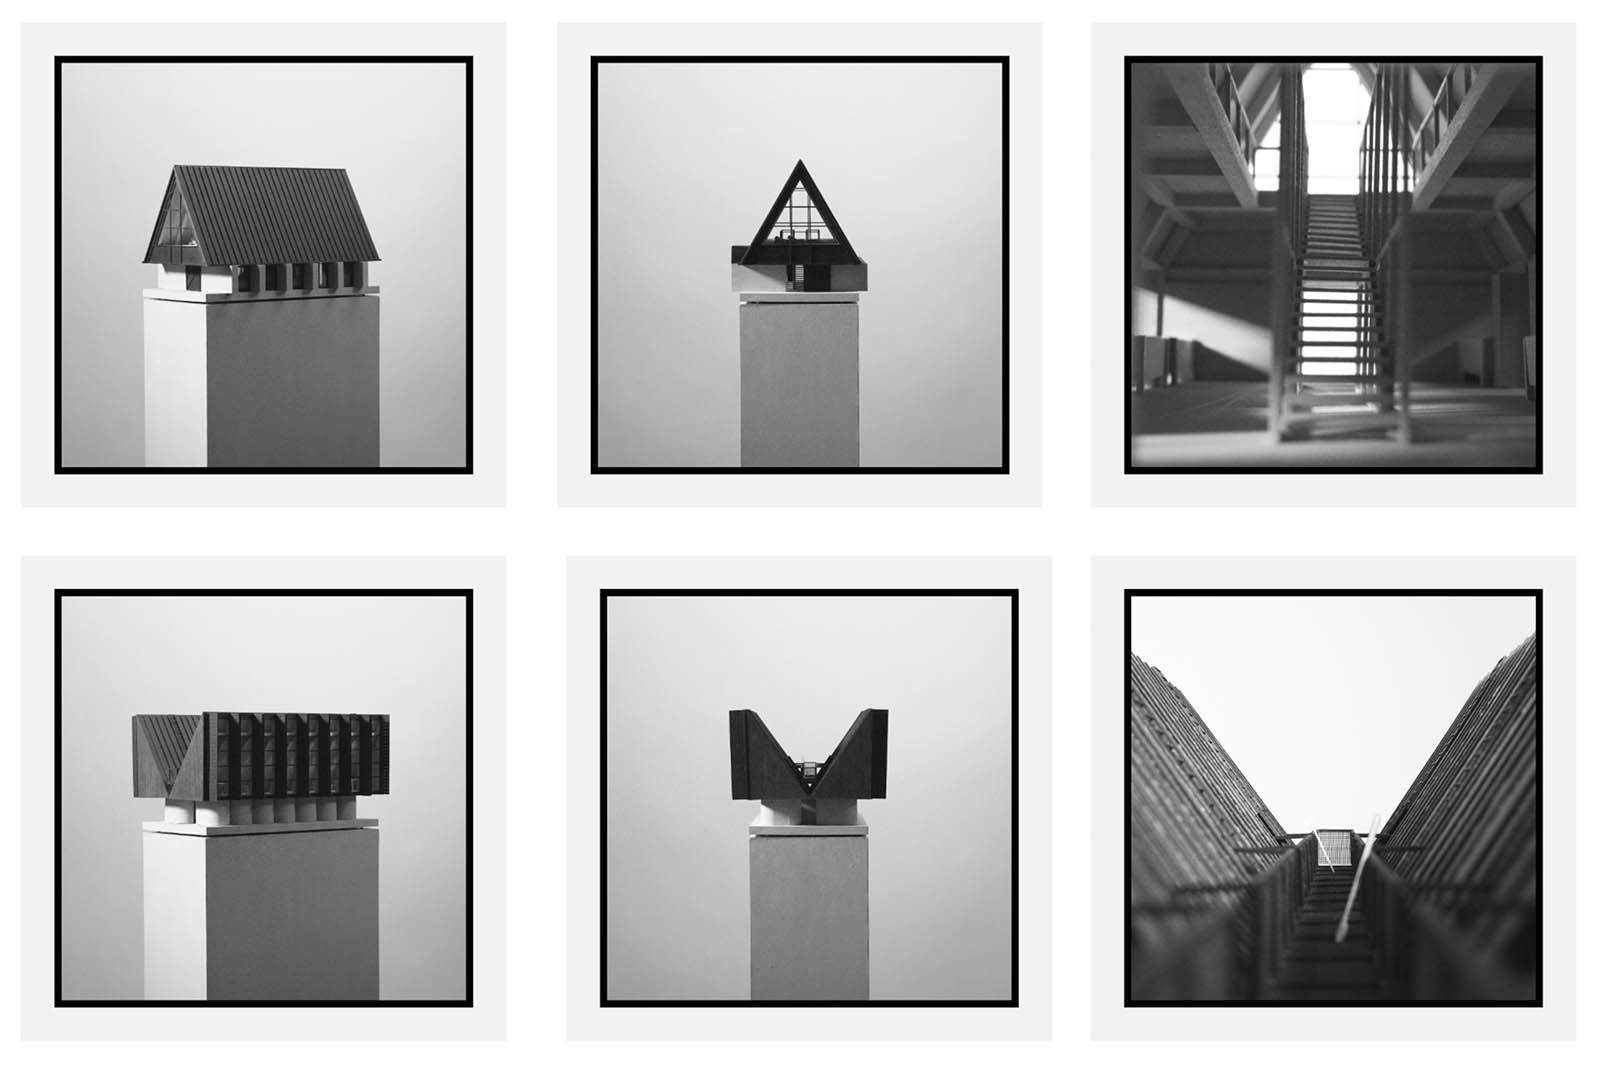 Six black and white images of wood architectural models; three exterior shots with sloped roofs and two interior shots showing details and staircase